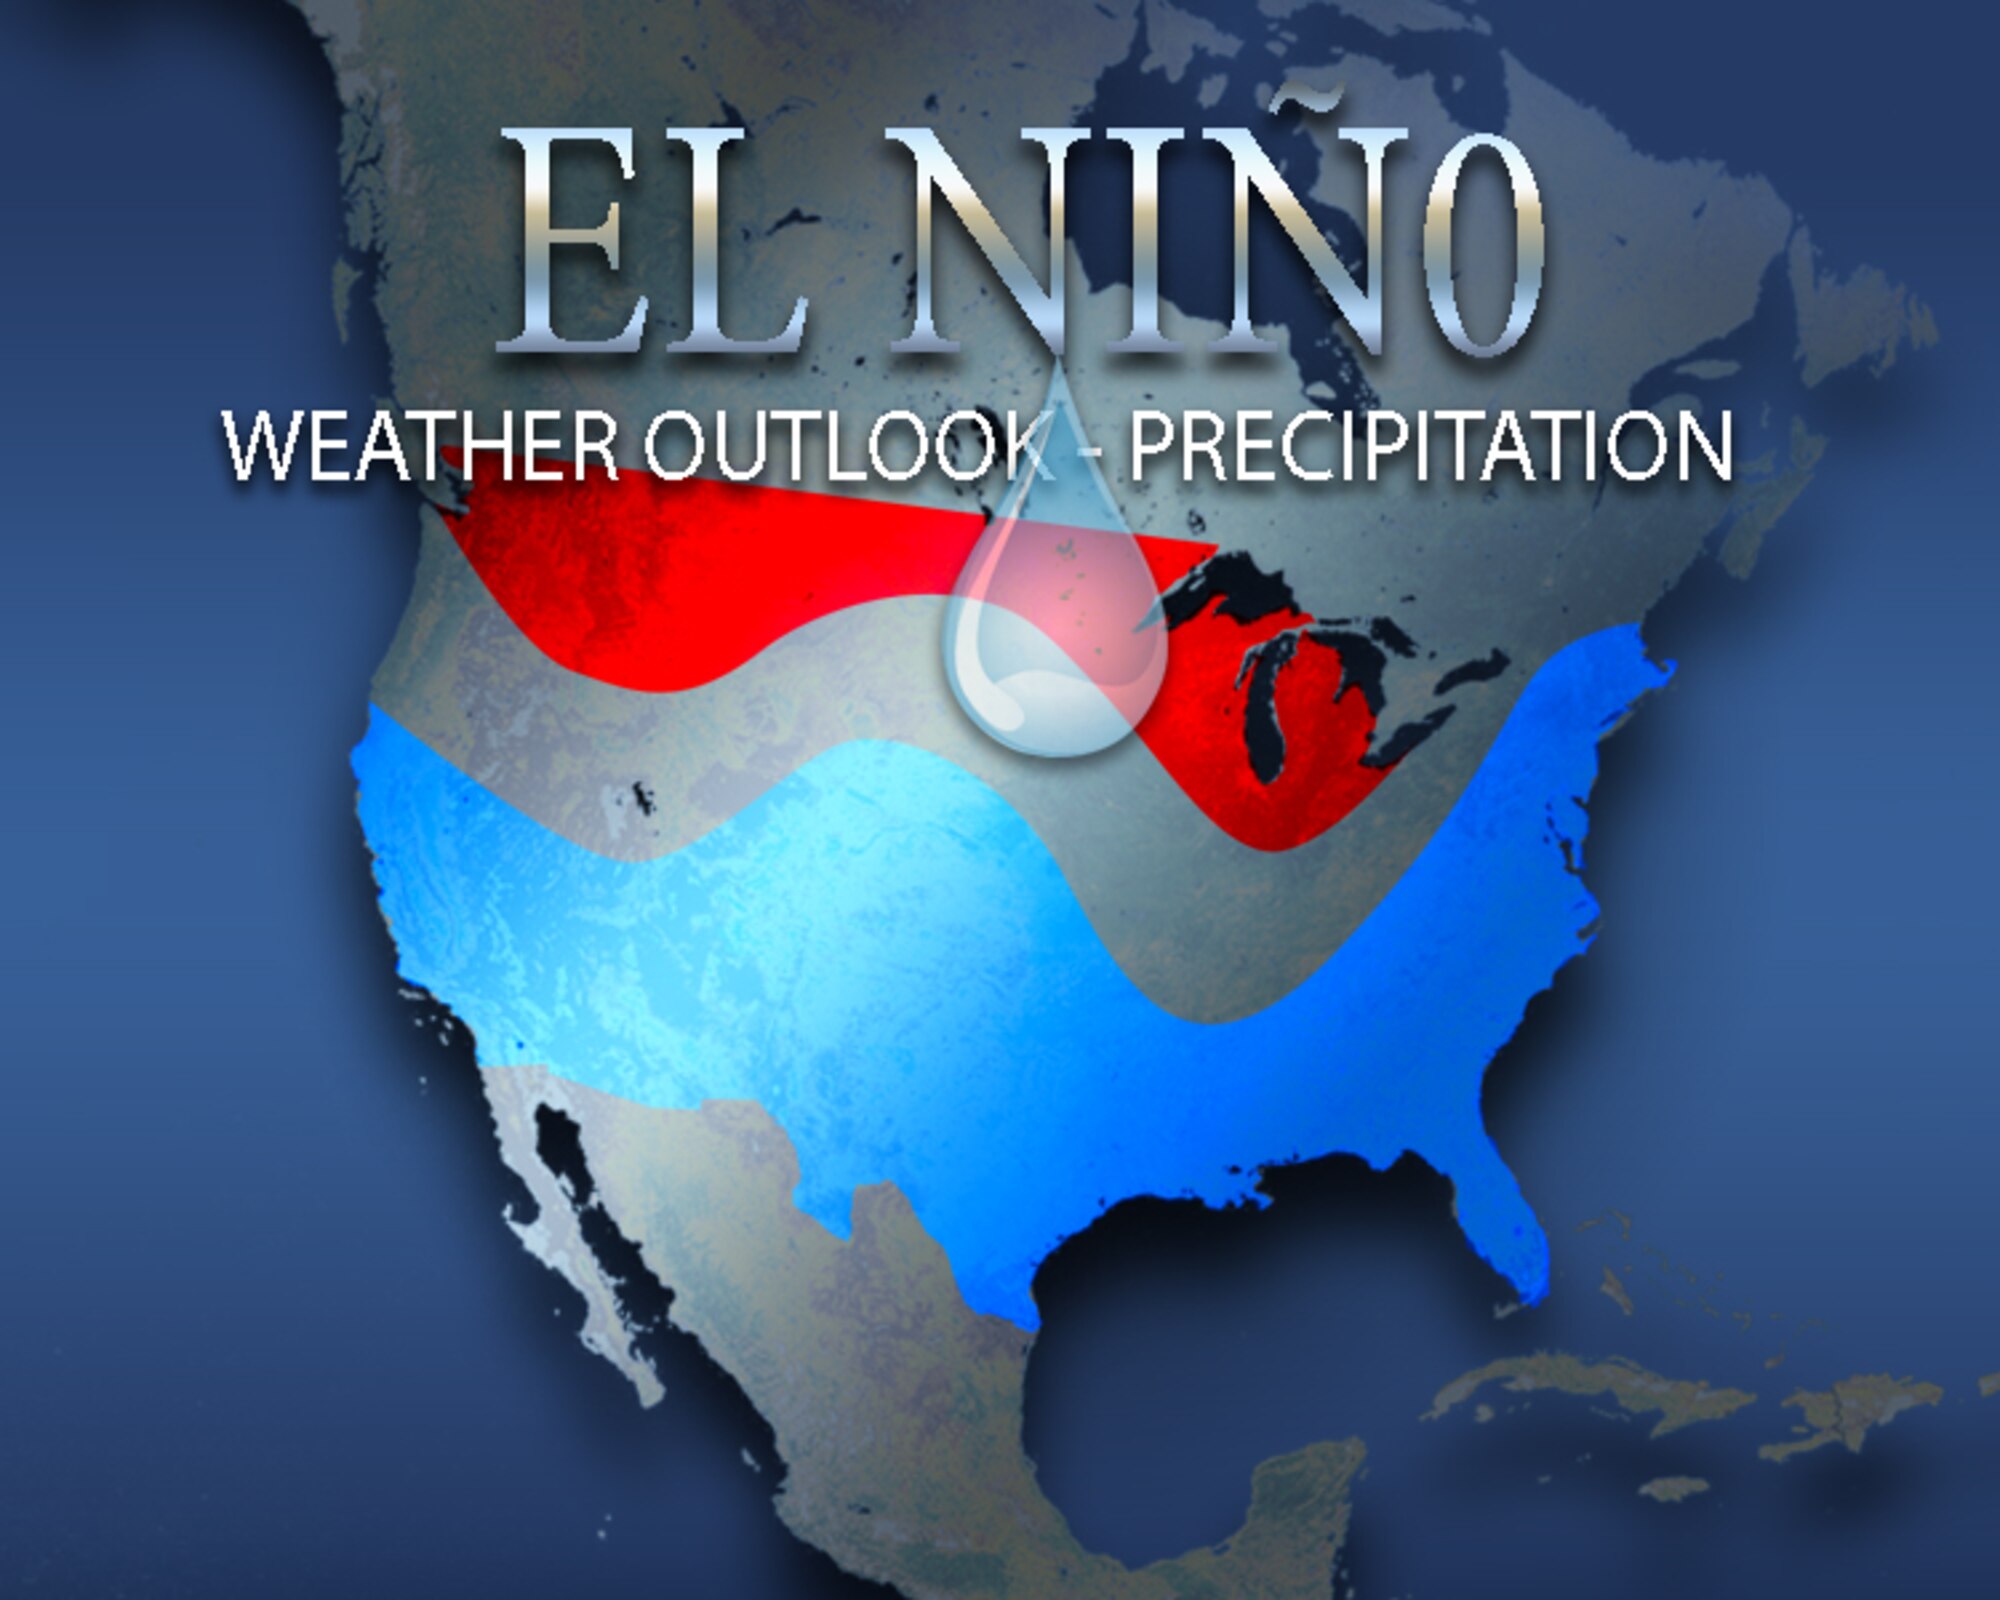 El Niño is a warm temperature anomaly pattern primarily located across the equatorial Pacific Ocean. The entire cycle known as the El Niño Southern Oscillation encompasses the sea surface temperature and deeper thermocline anomalies alongside an atmospheric pressure pattern. The ENSO cycle causes global changes of both temperatures and rainfall.